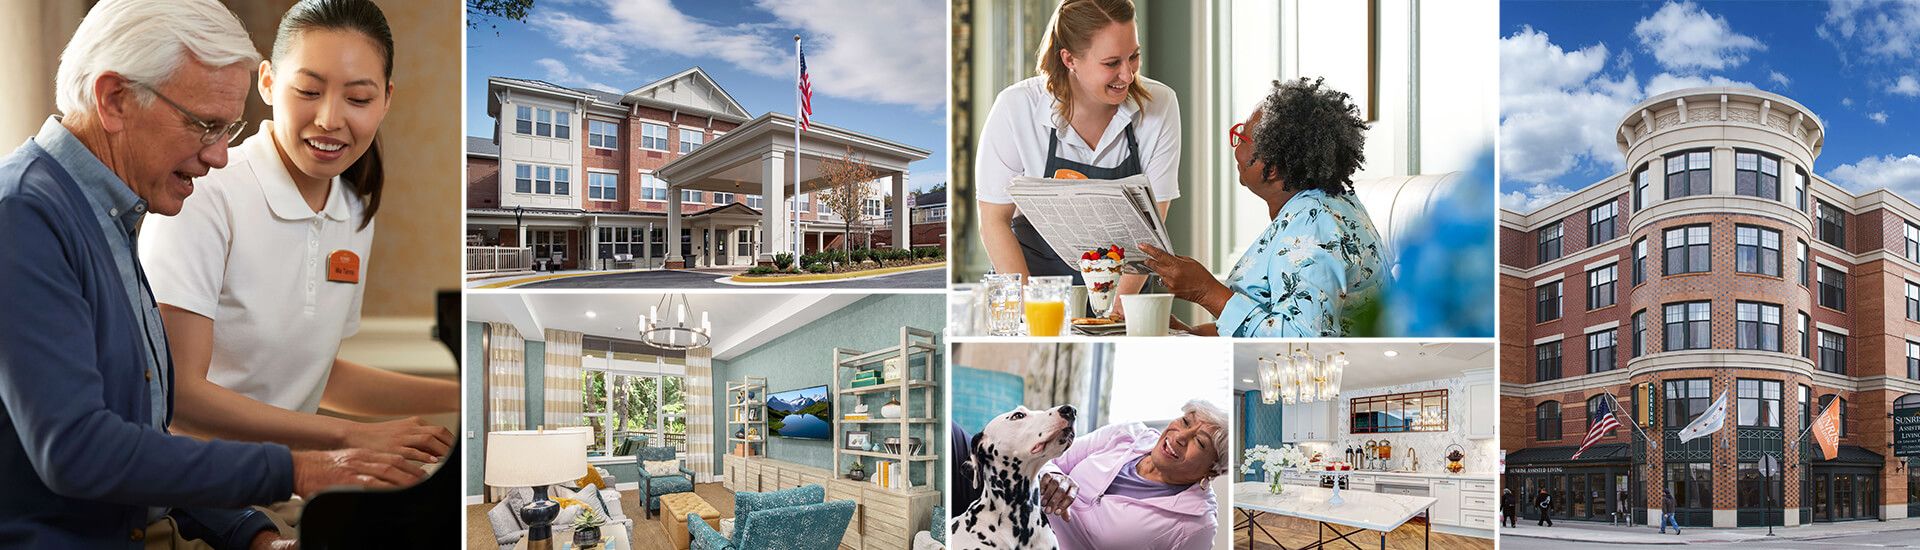 The Sanctuary Assisted Living Facilities Charlotte Nc